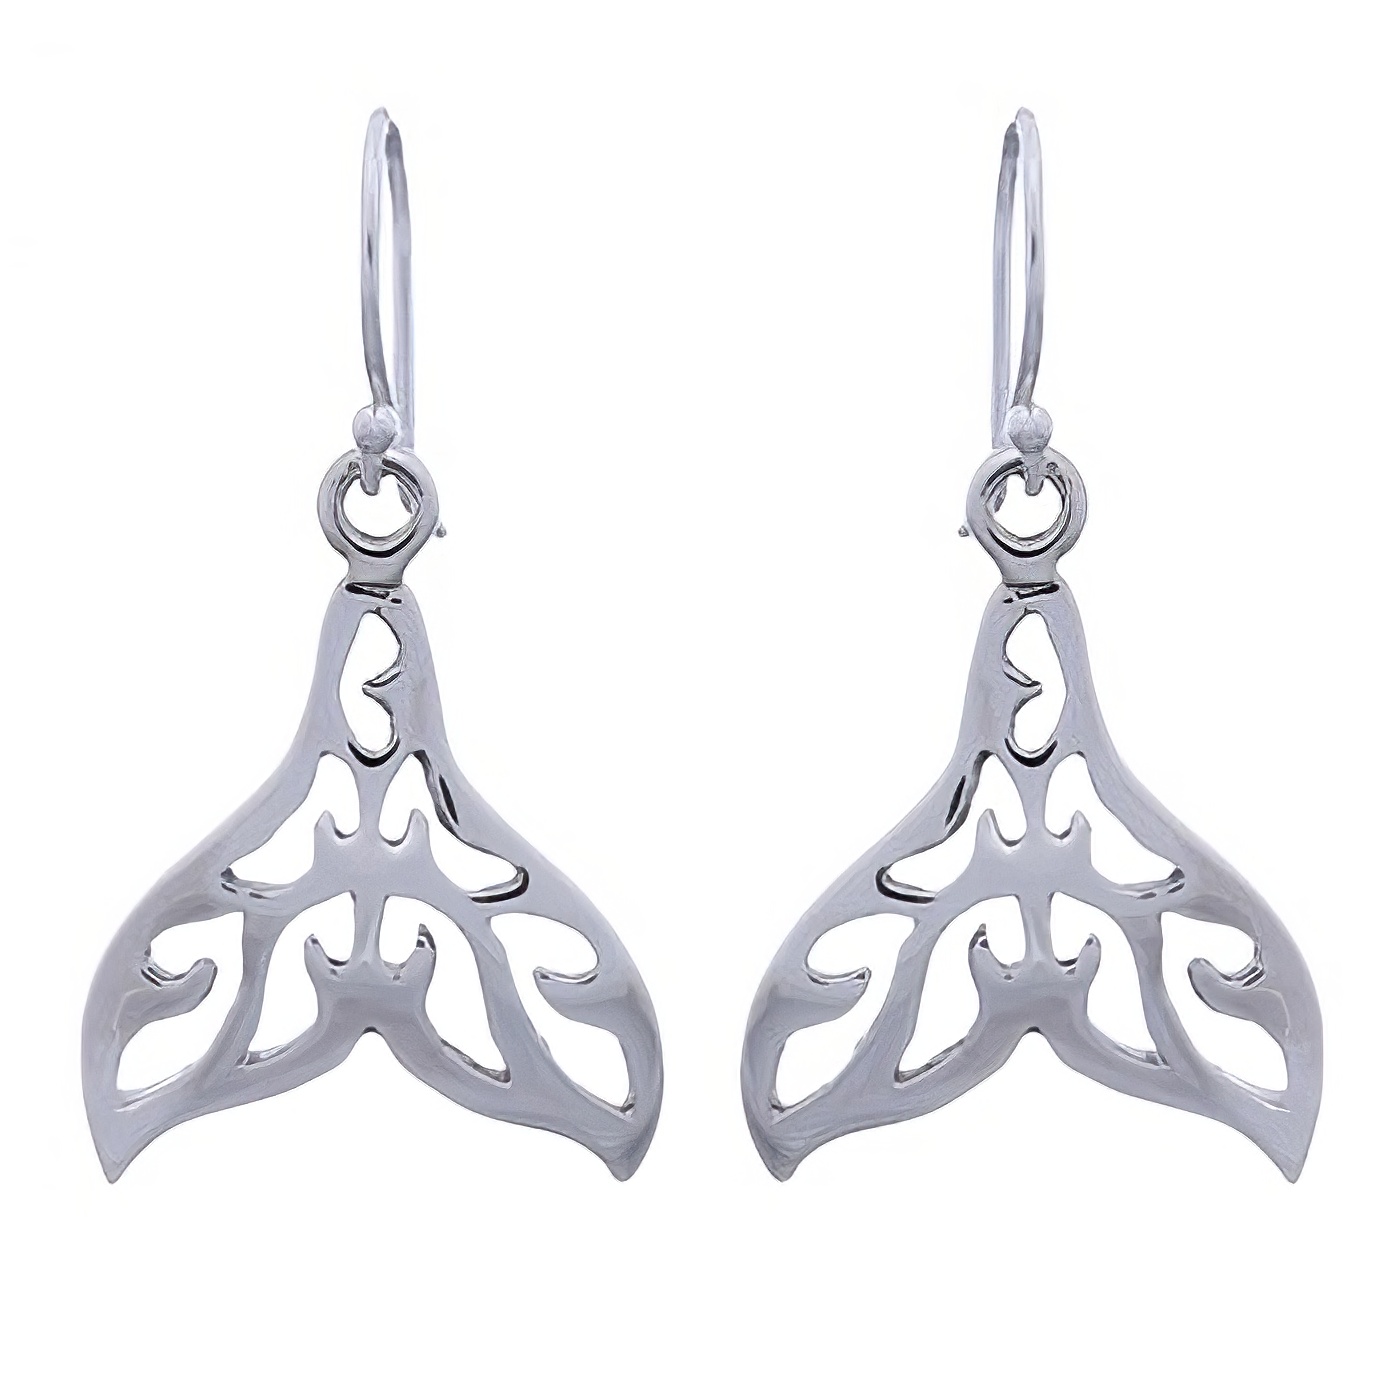 Ajourable Tail Of Whale Sterling 925 Earrings by BeYindi 